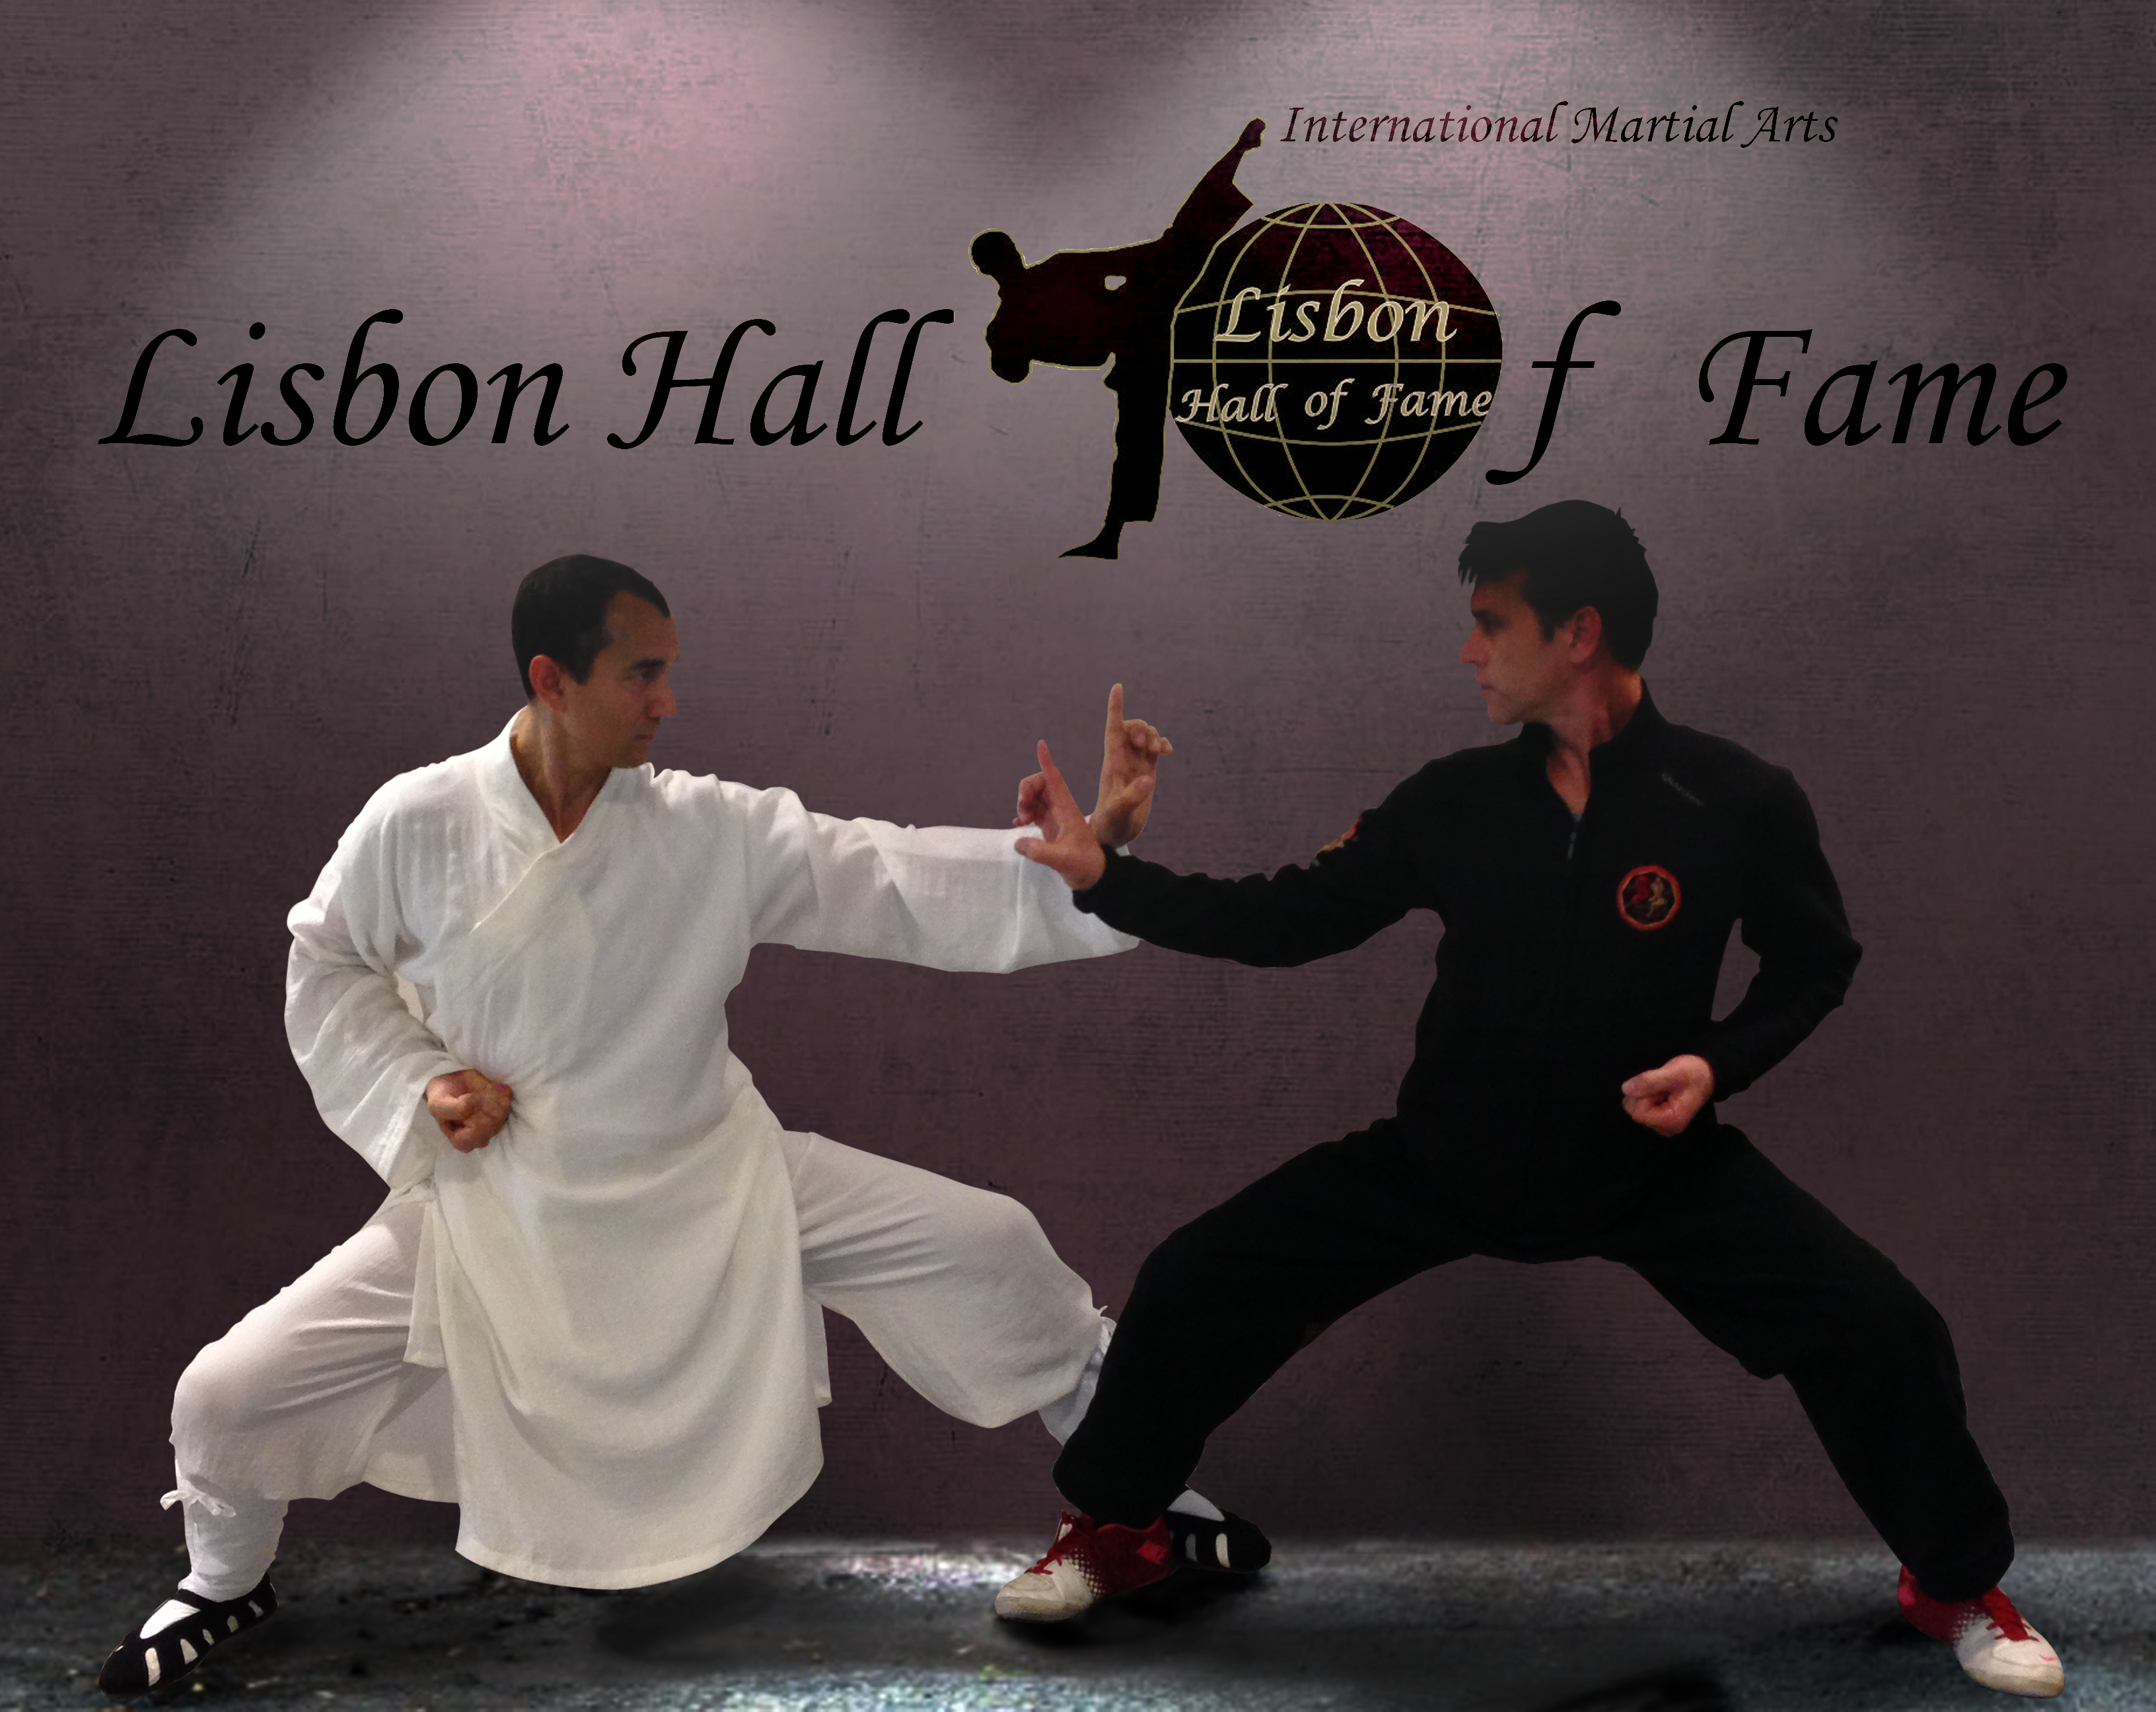 Here as a celebrity guest and inducted into the International Martial Arts Lisbon Hall of Fame. With event organizer and host Vitor Lagarto.